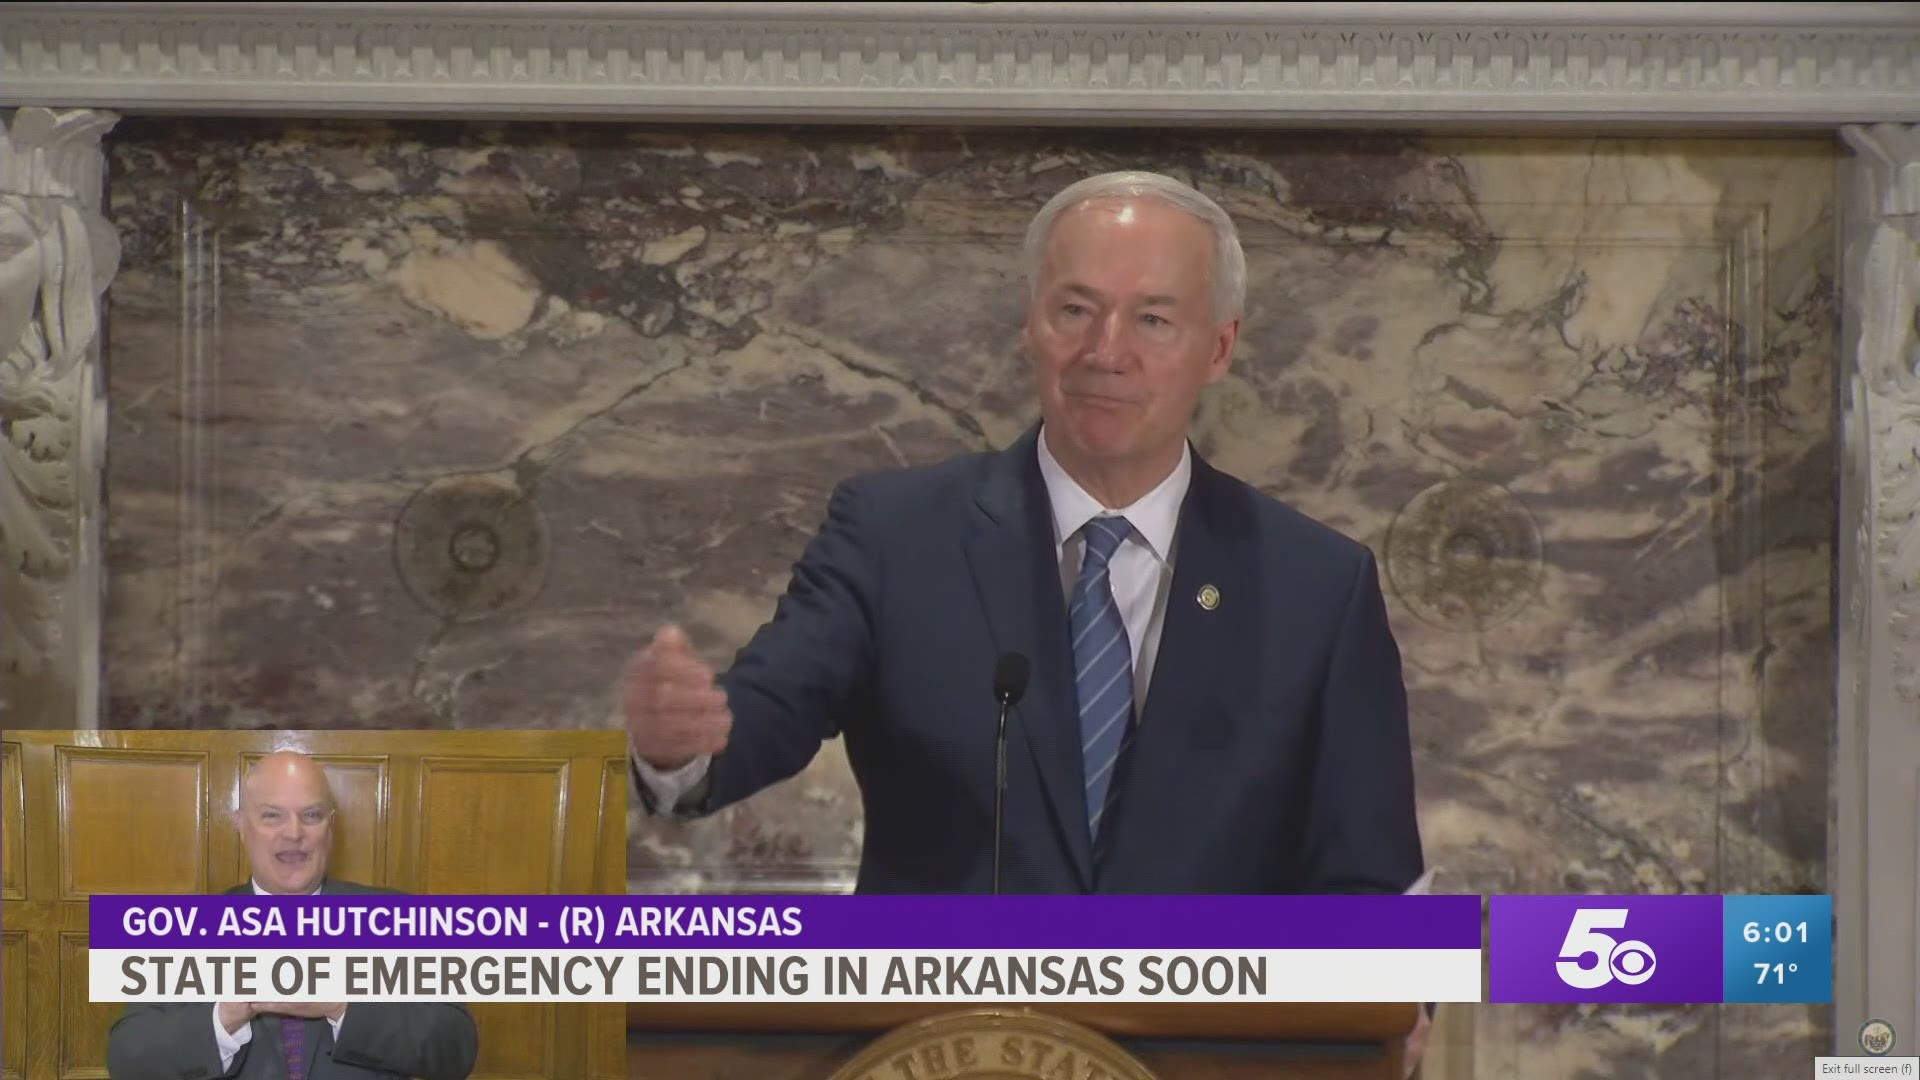 Arkansas Governor Asa Hutchinson confirmed Thursday that the COVID-19 emergency declaration would expire at the end of May.